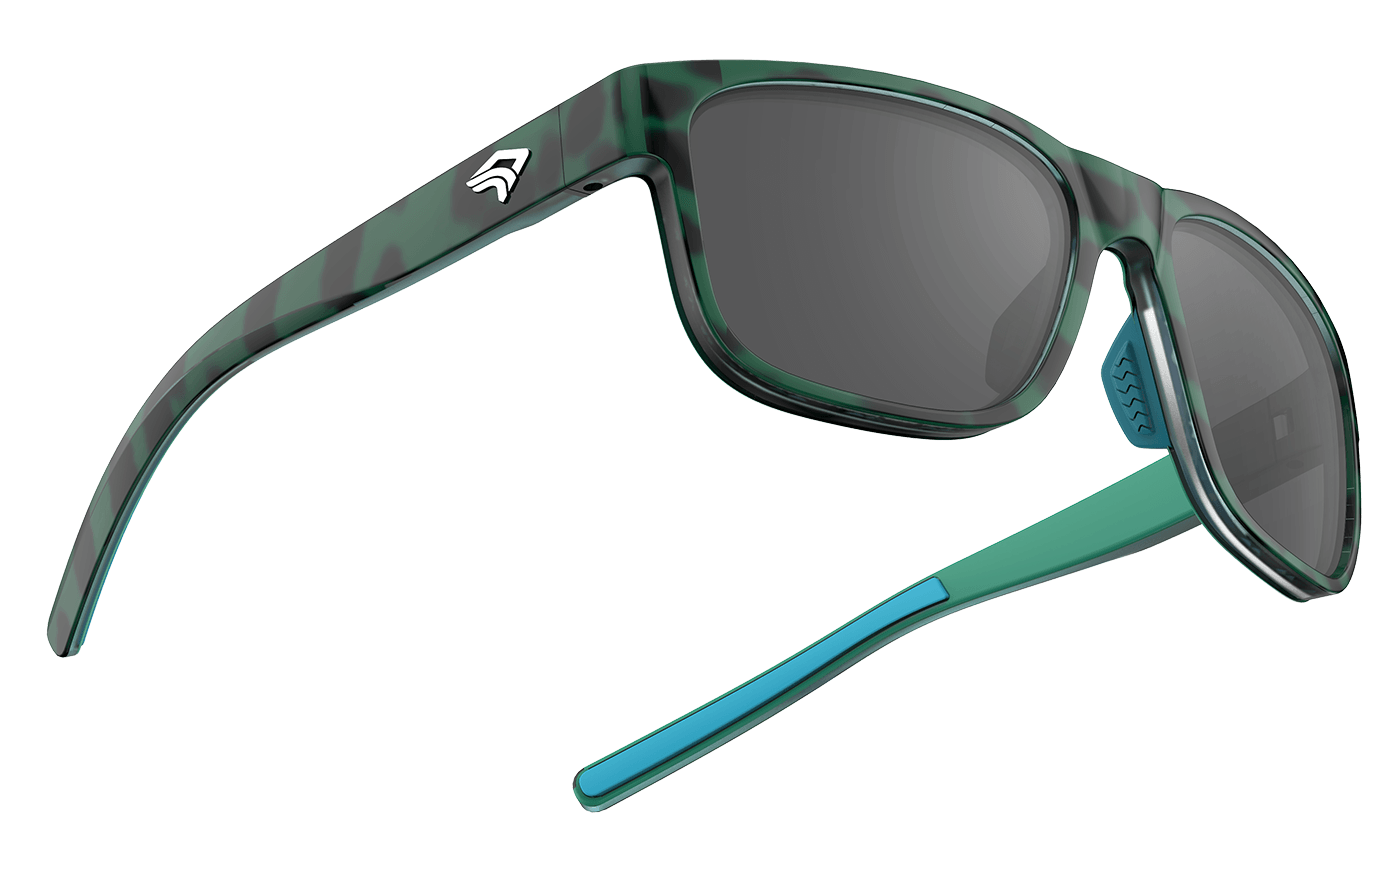 Green Coral Polarized Sunglasses - Emerald Green With Black Spots Frame &  Gray Lenses